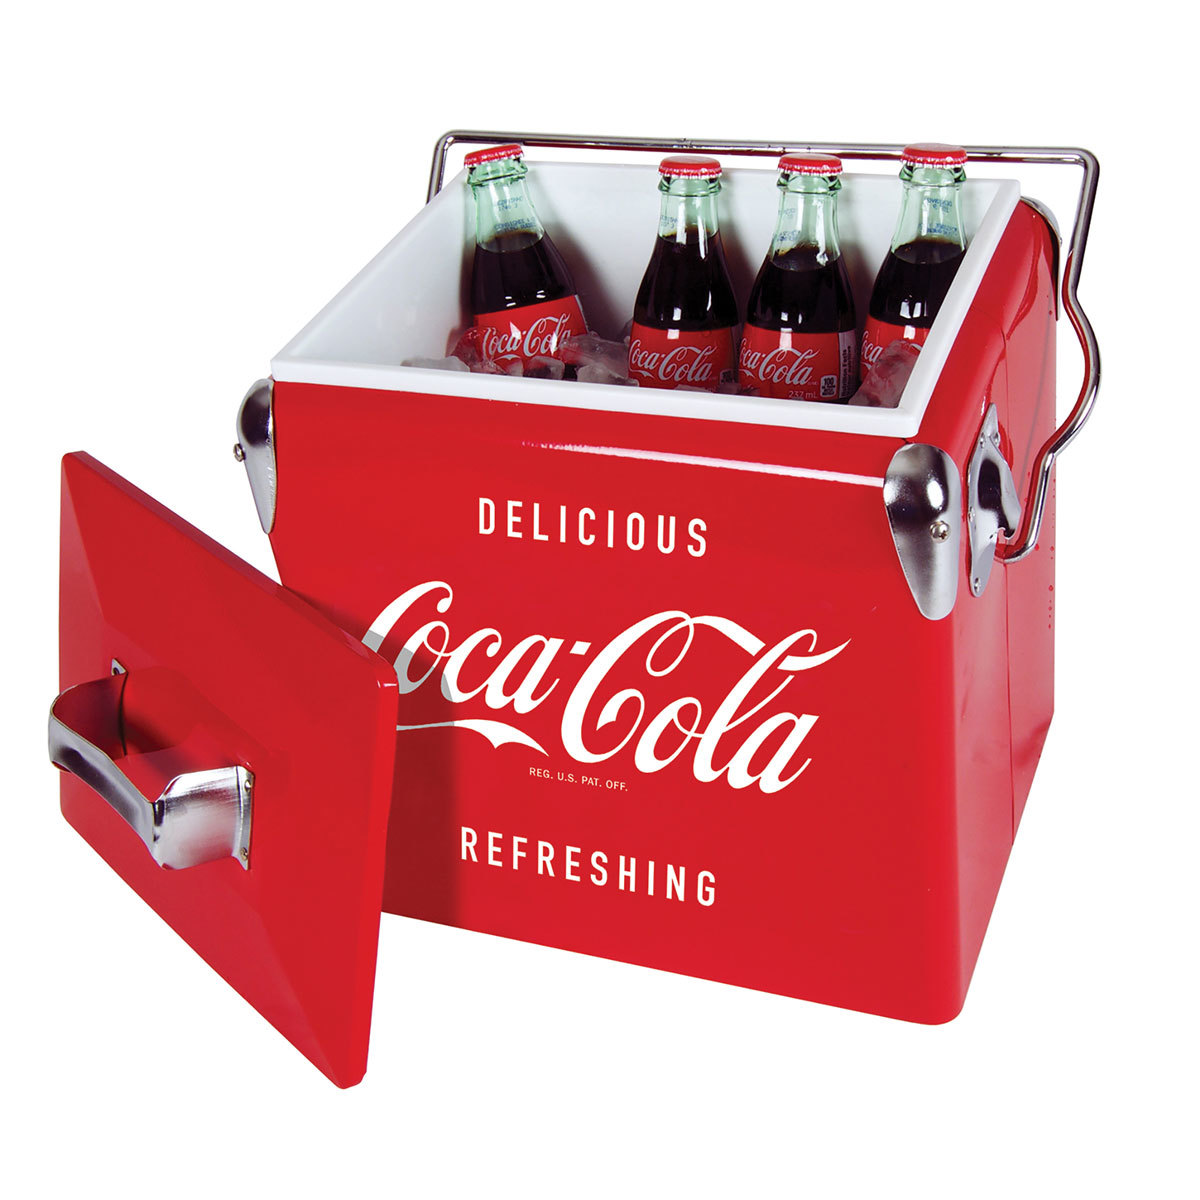 Coca-Cola Stainless Steel Ice Chest Bundle